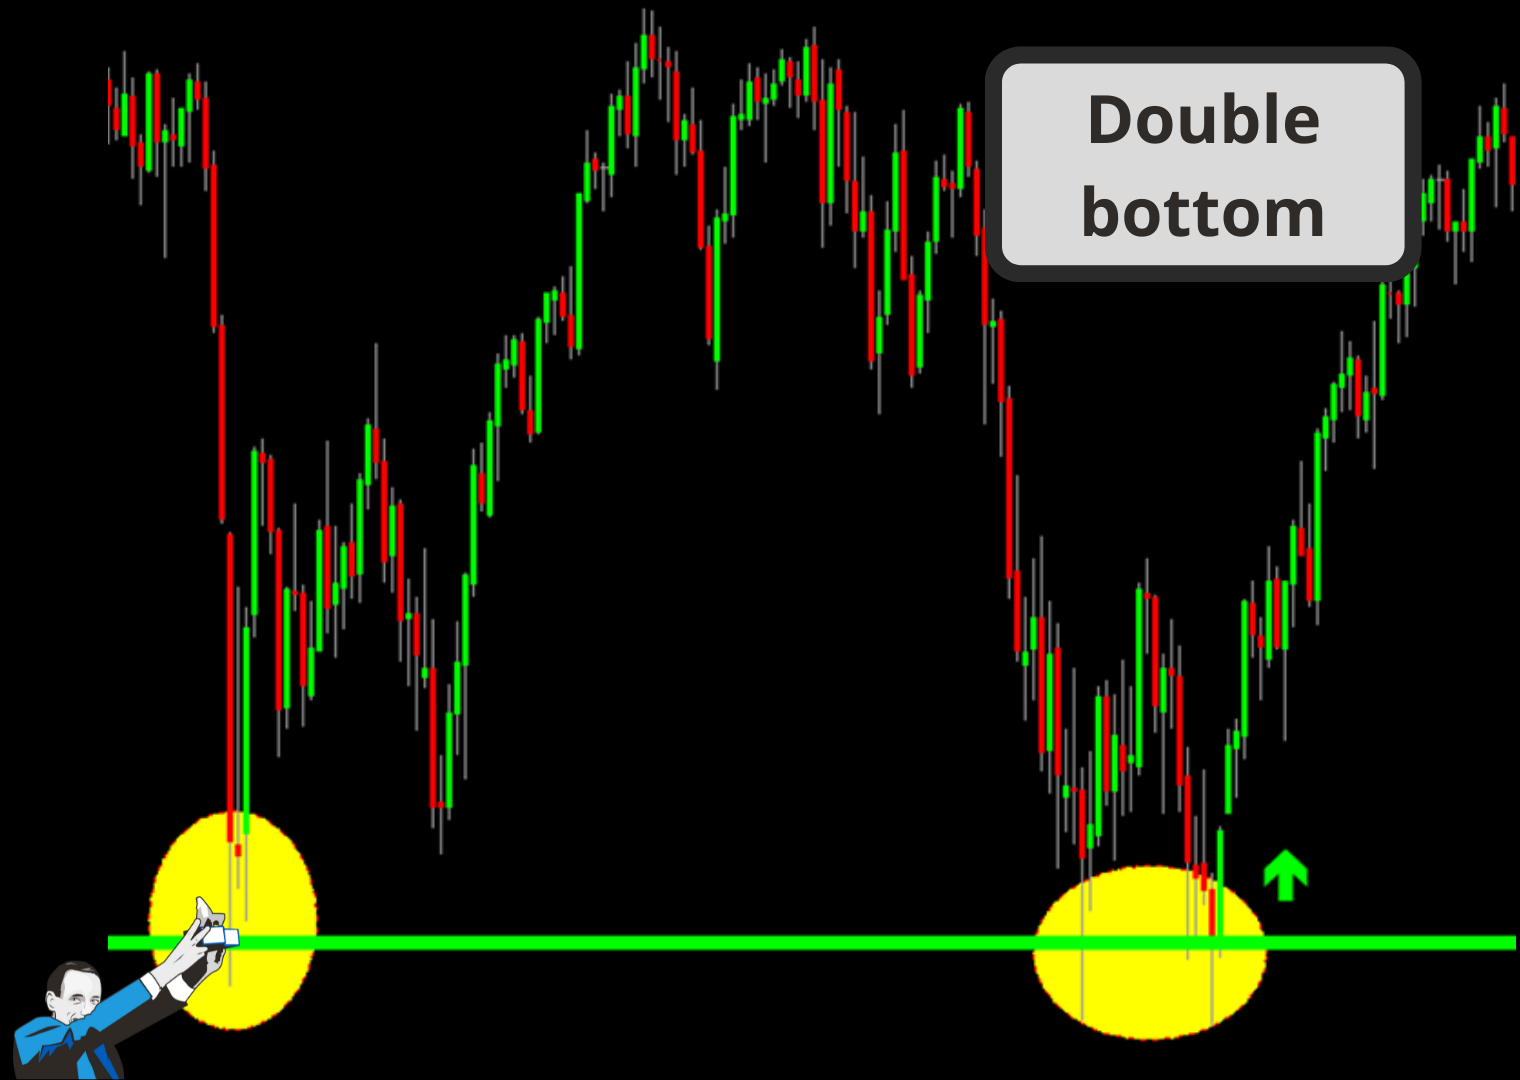 double bottom trading price pattern how to use